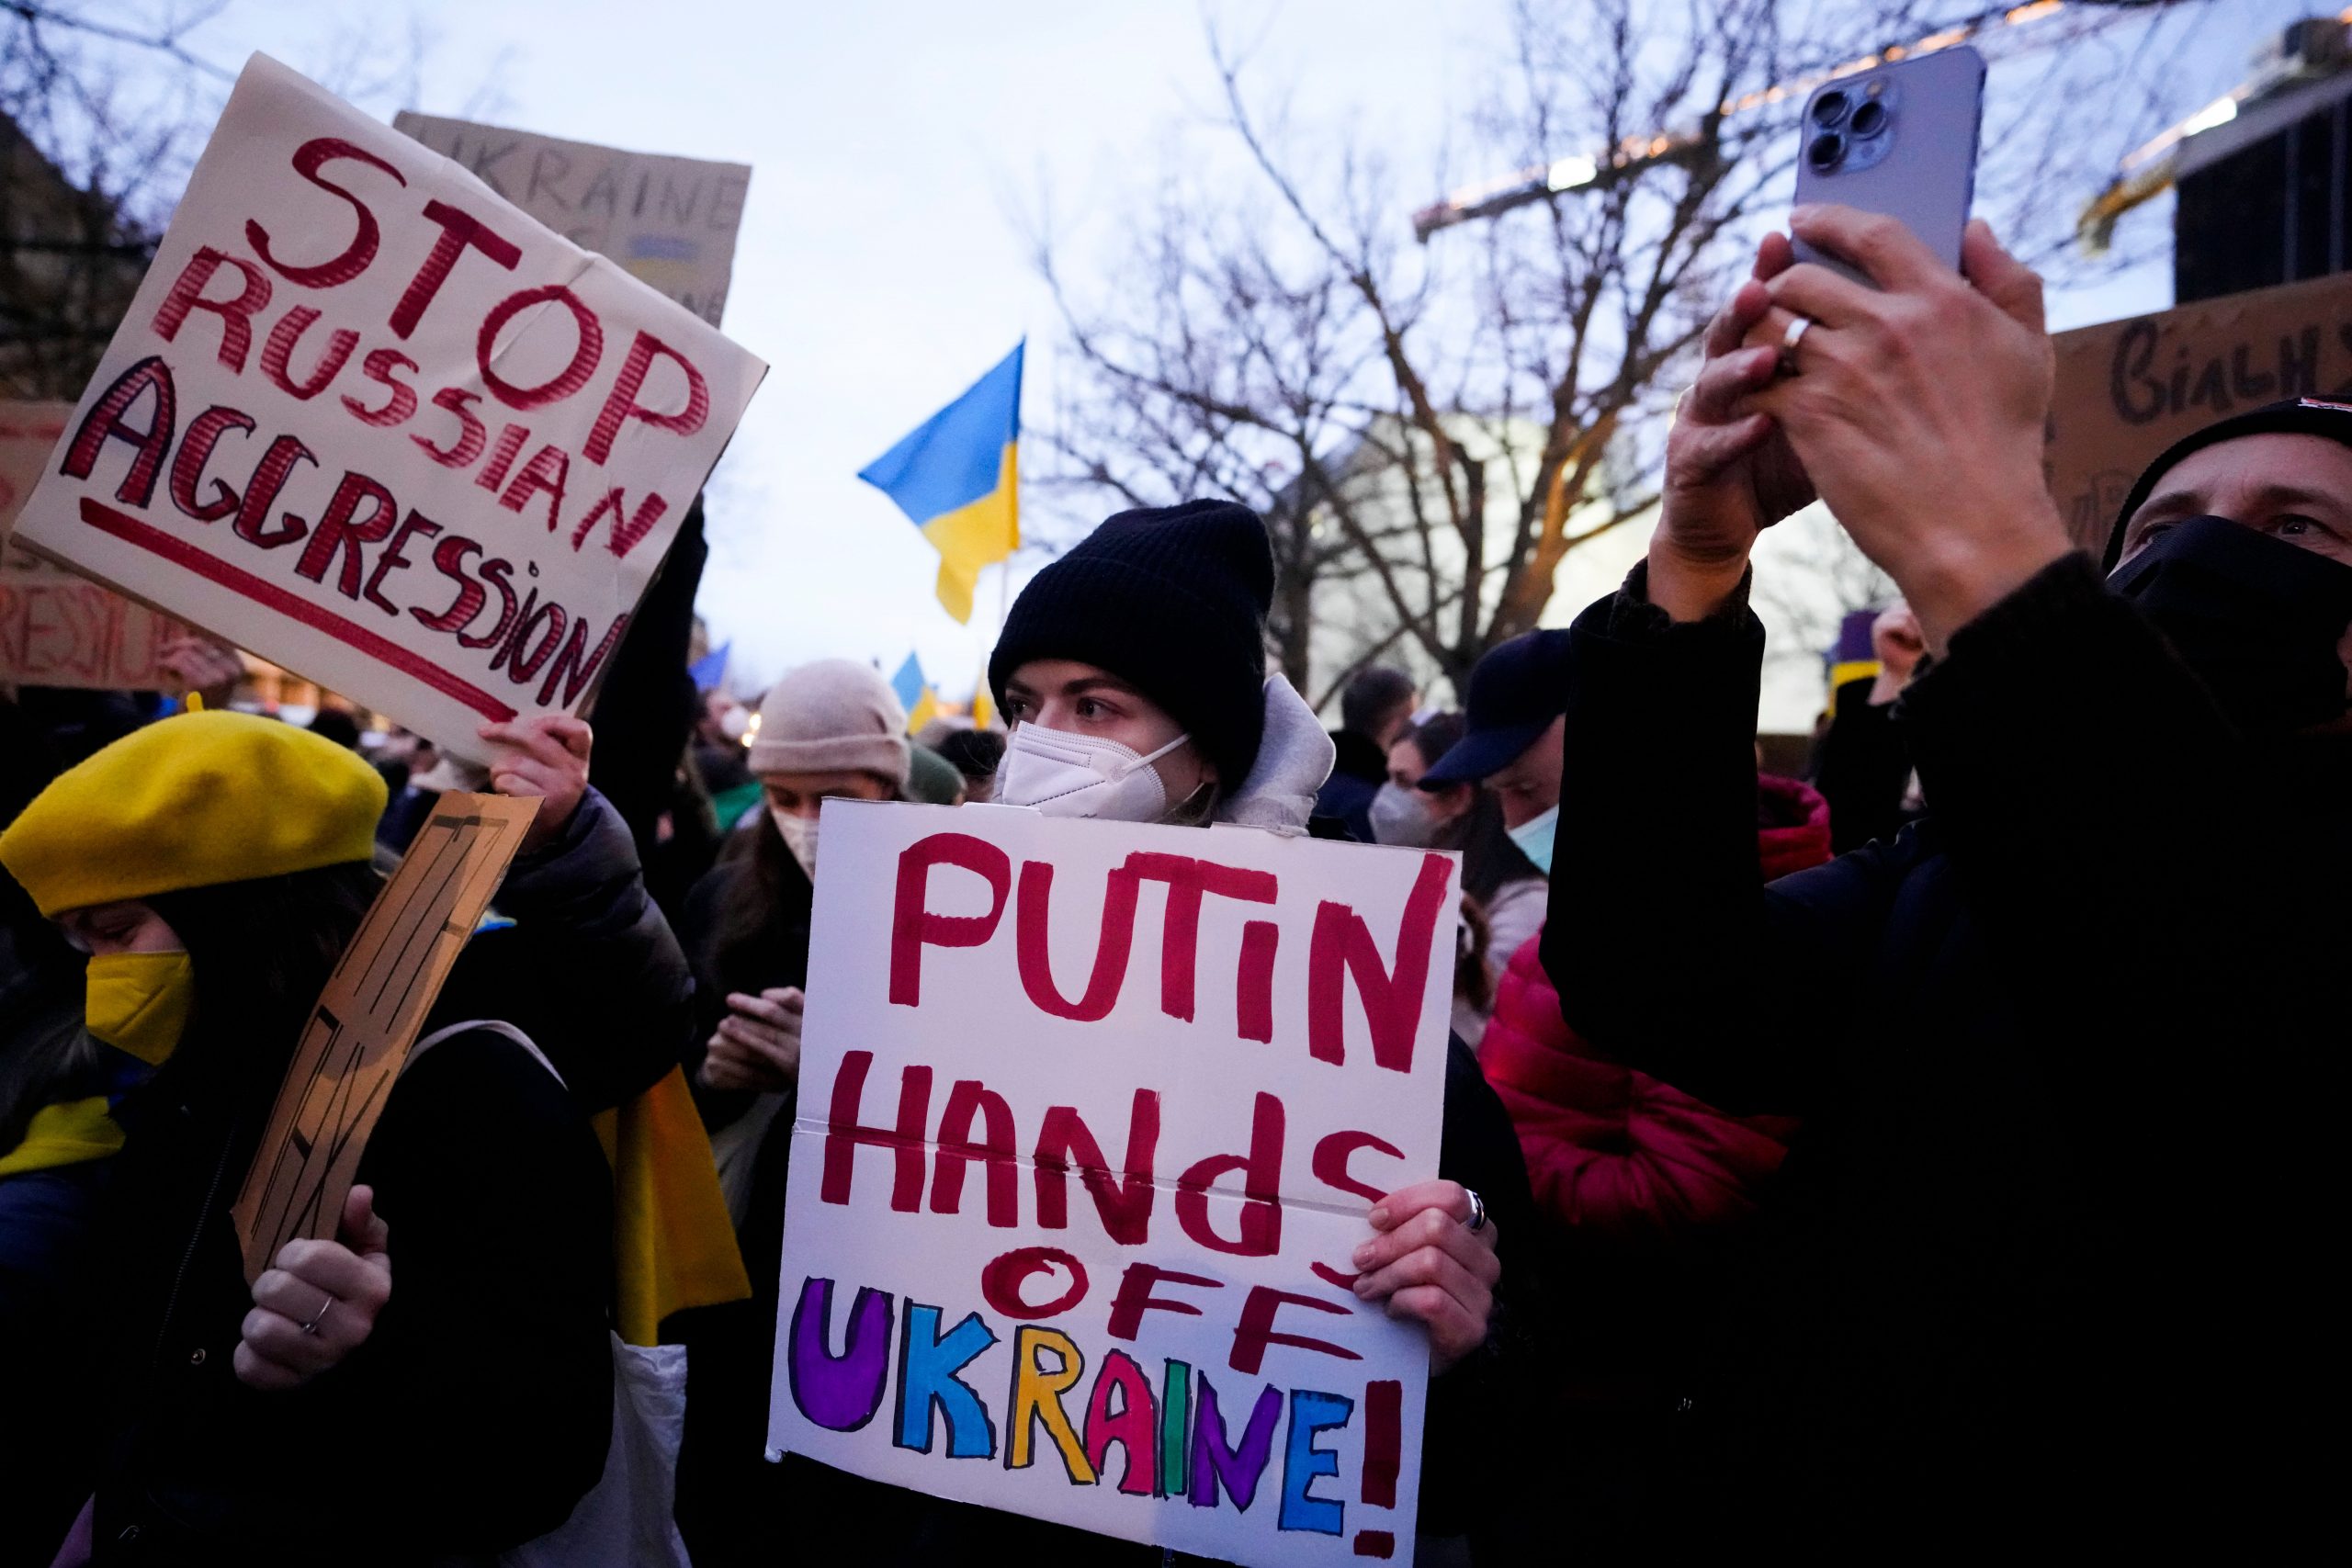 Peaceful solution to Ukraine crisis seems impossible, Europe braces for trouble